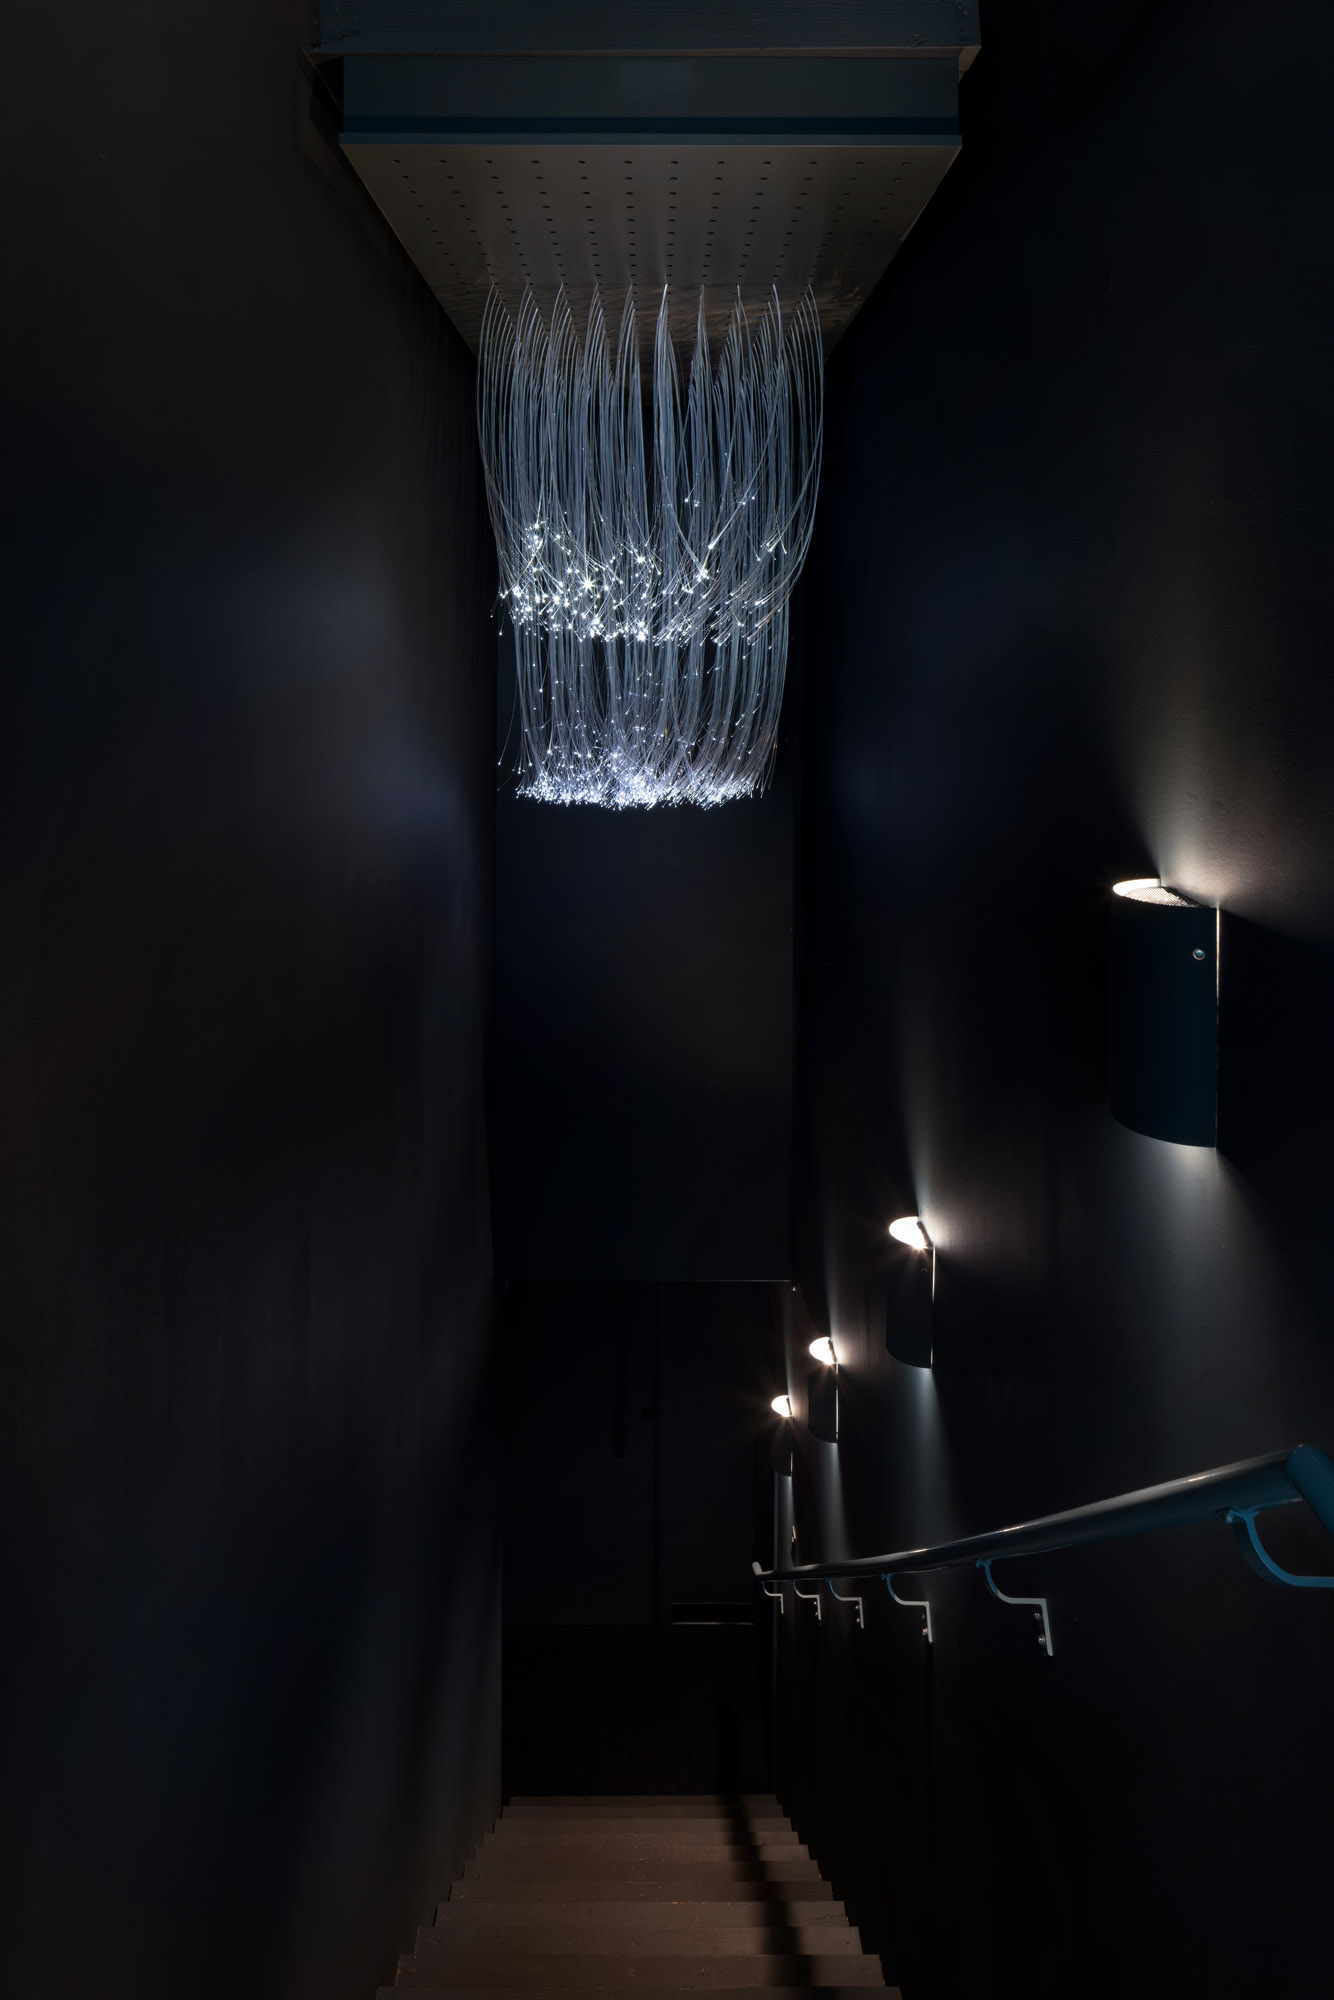 A jelly fish-like blue lamp and a dark staircase